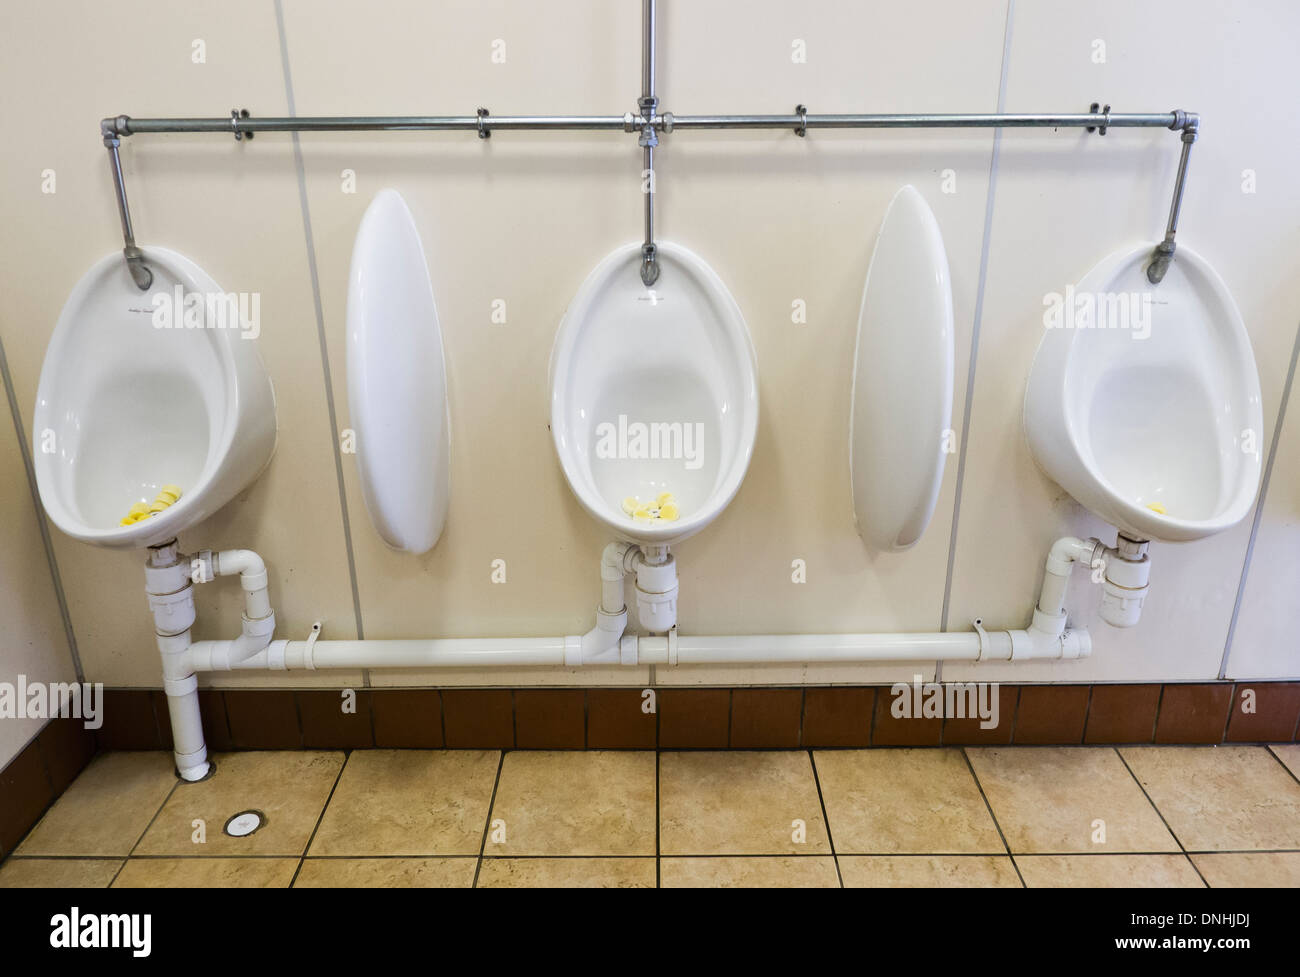 Urinals in a gents public toilet. Stock Photo